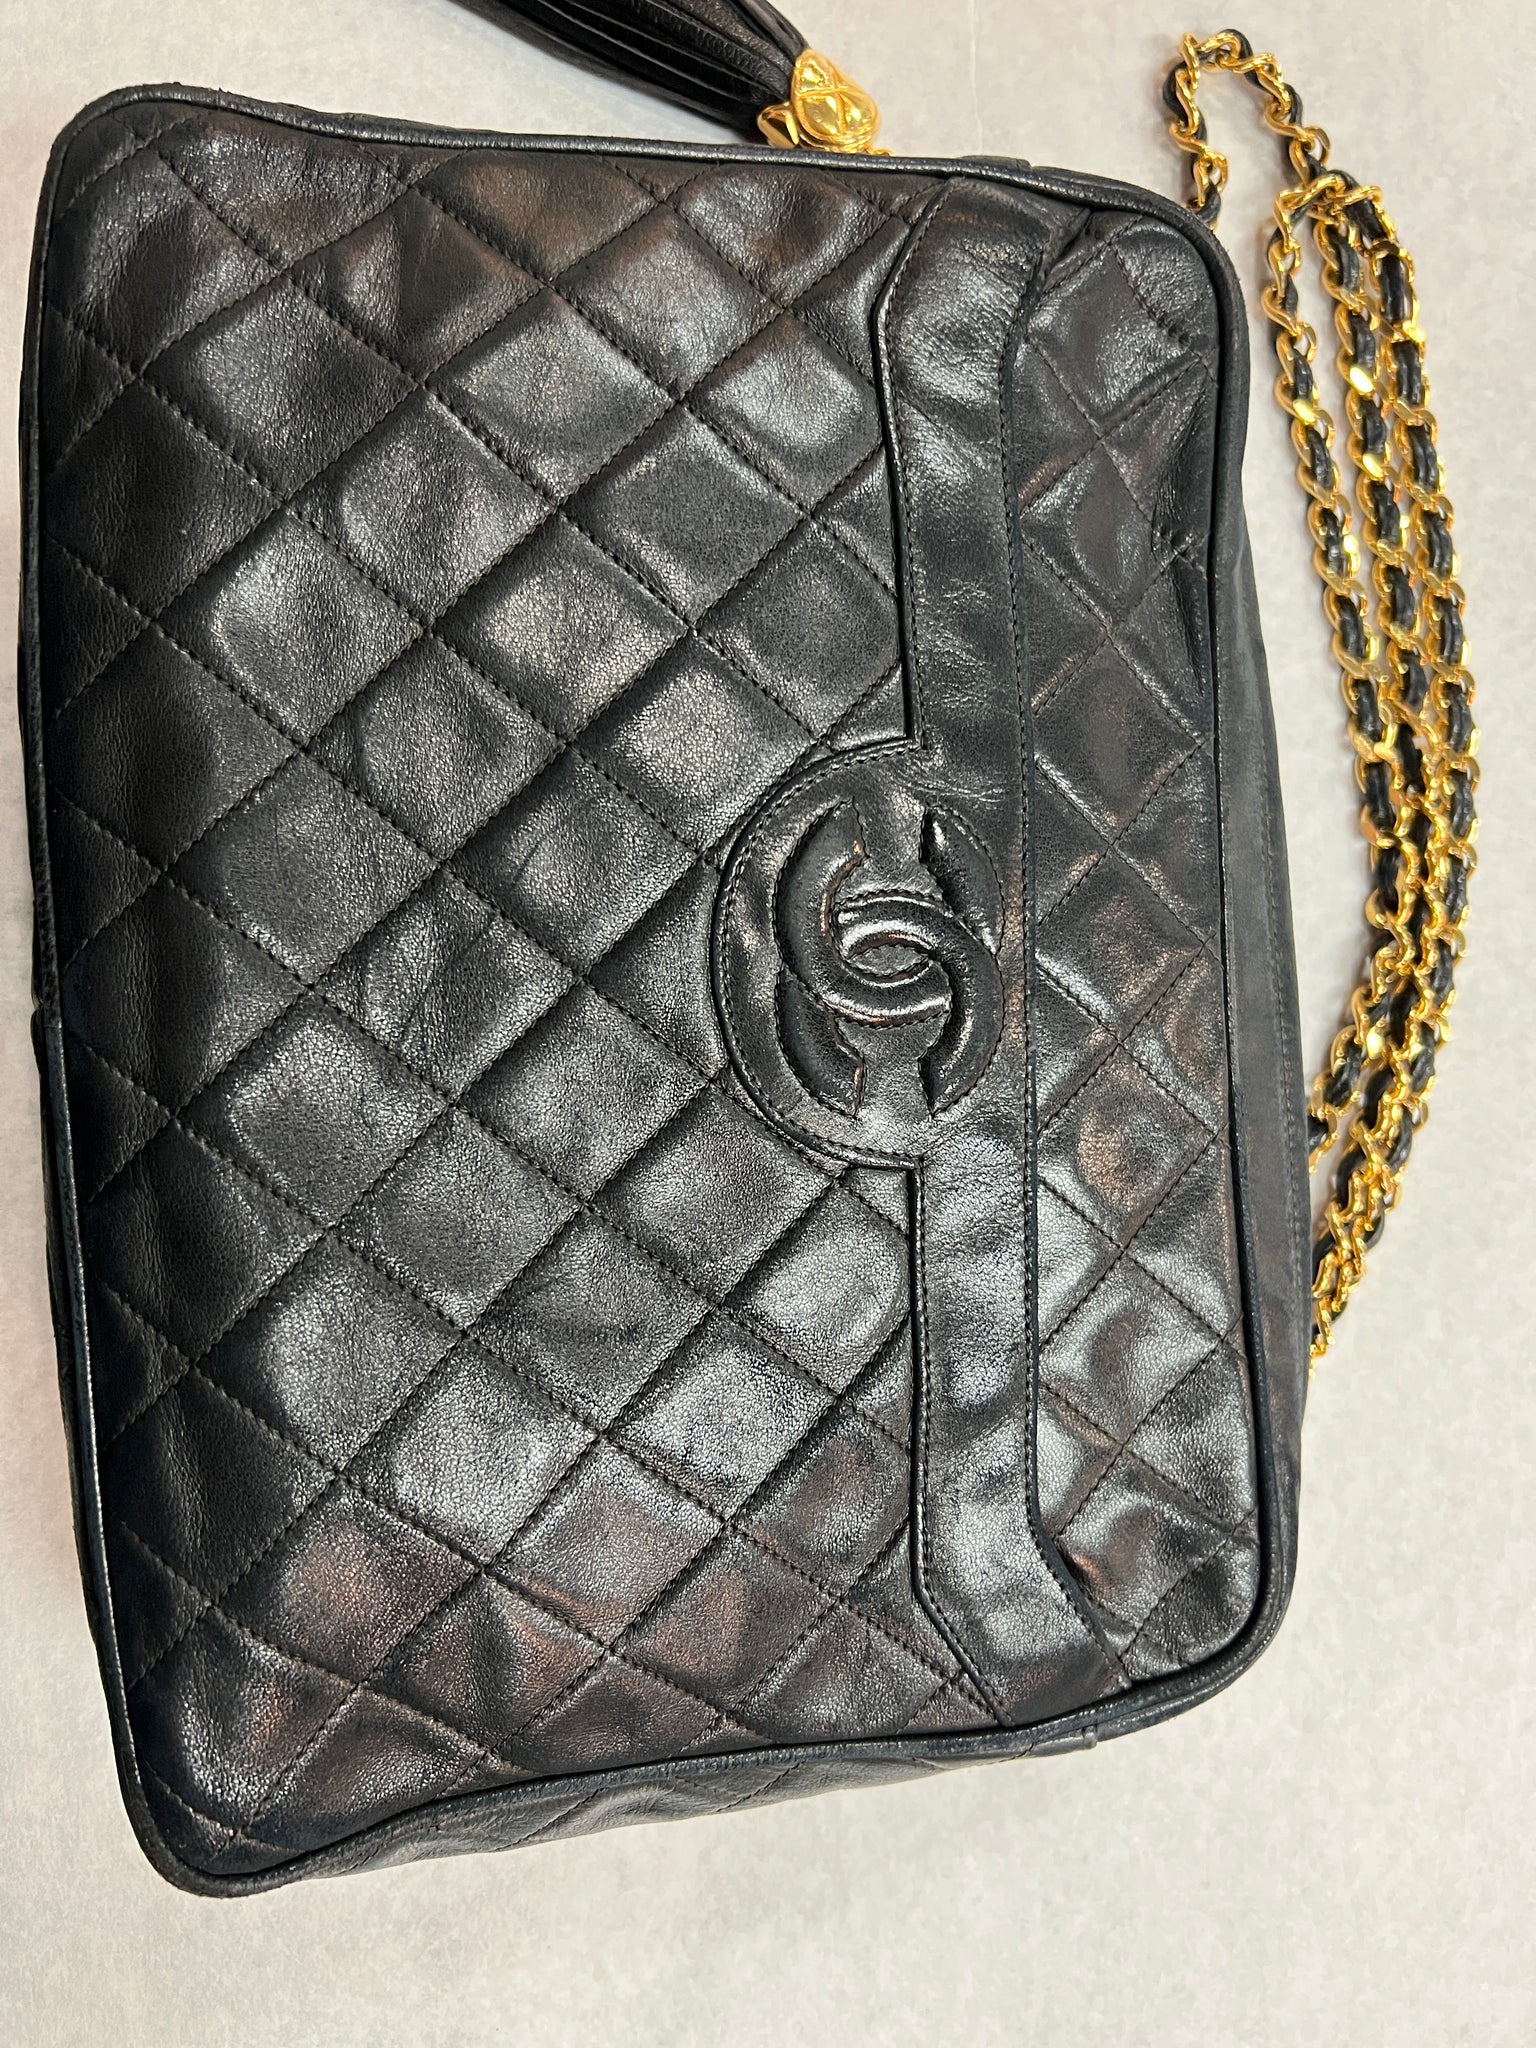 CHANEL, Bags, Chanel Purse Real Authentic